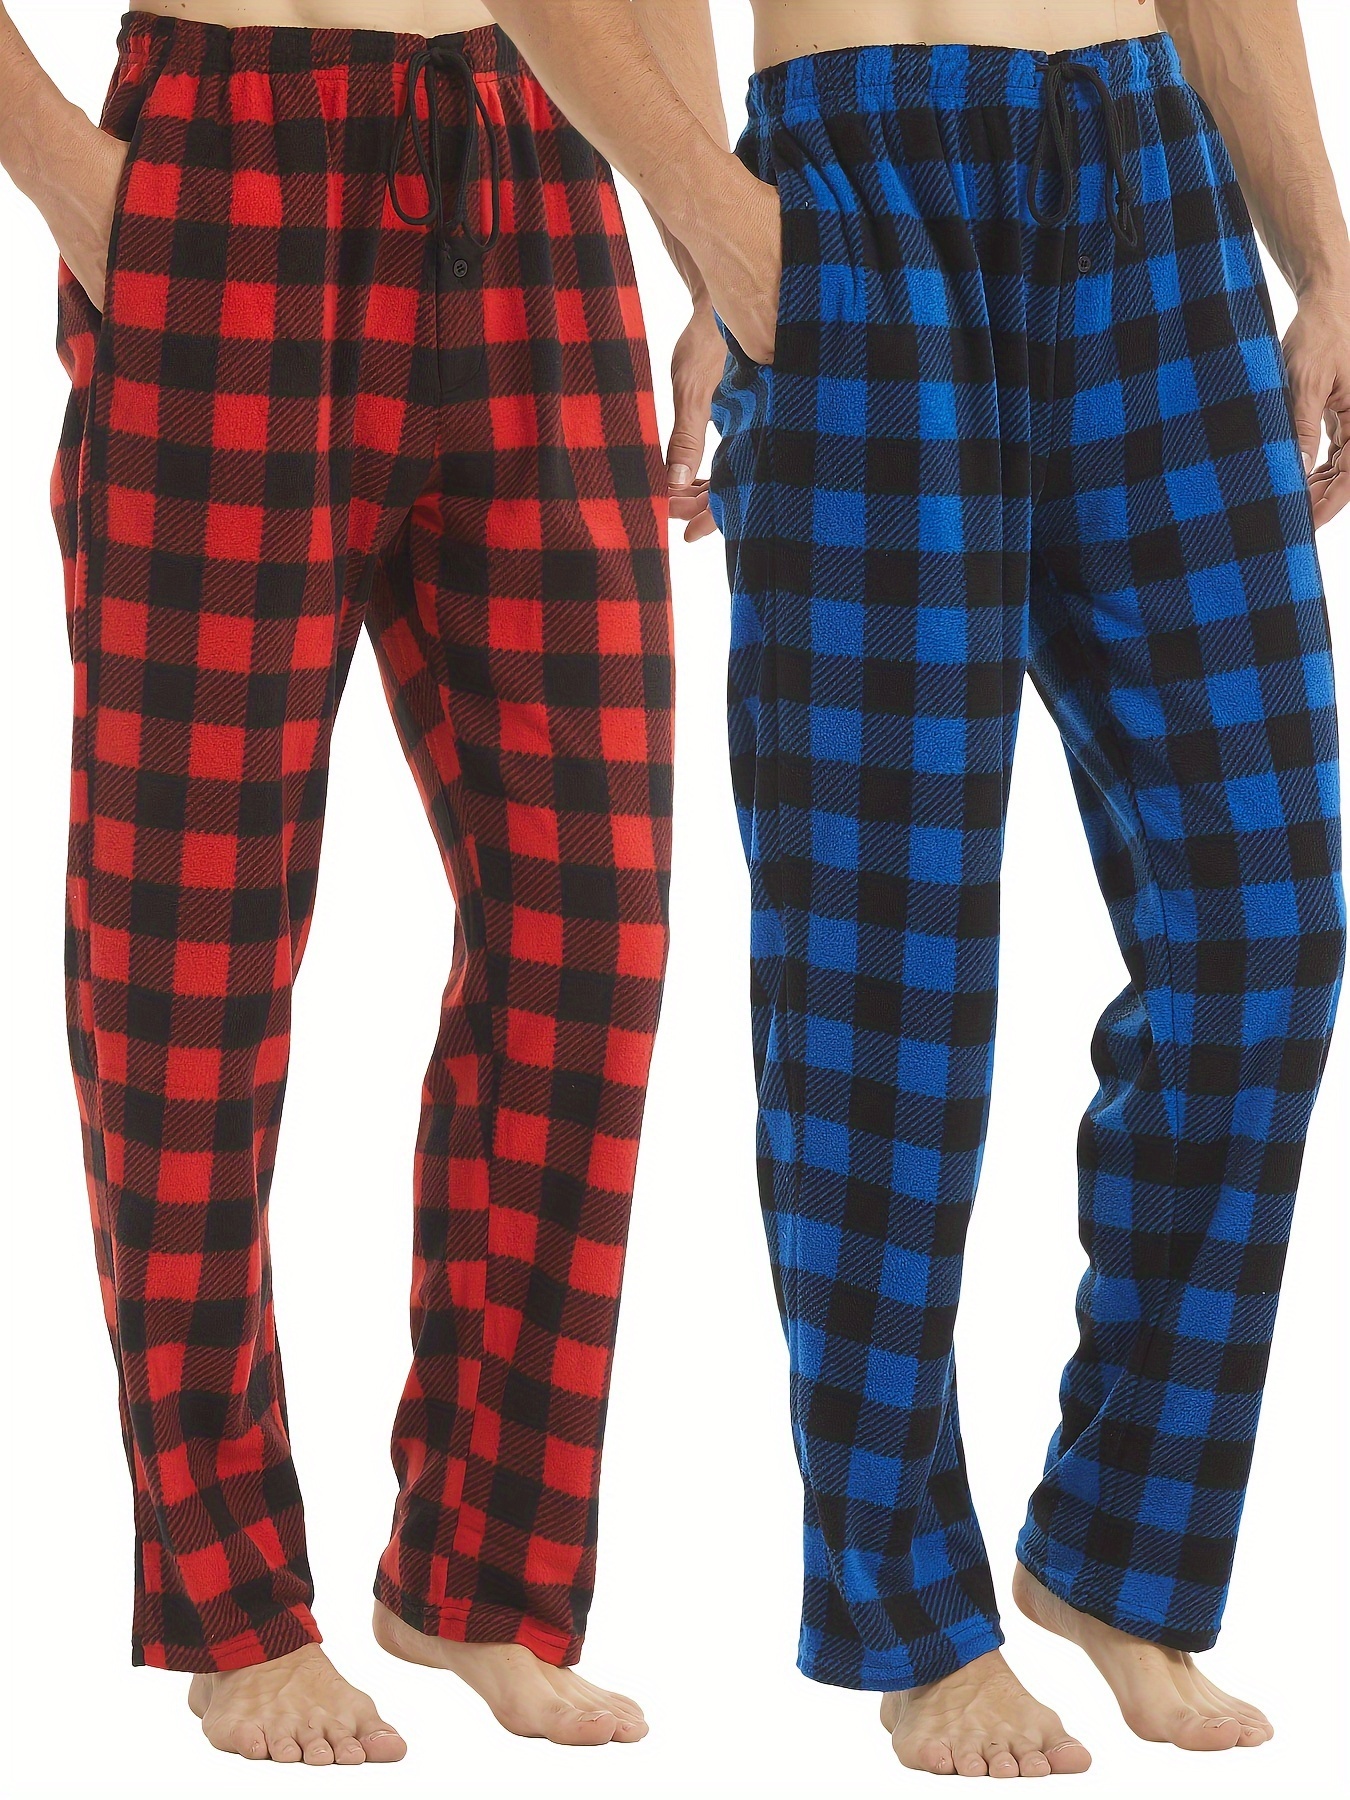 Men's Trendy Home Pajamas Sets, Casual Comfy Tees With Chest Pocket &  Checkered Pants, Outdoor Sets For Summer, As Valentine's Day Gifts